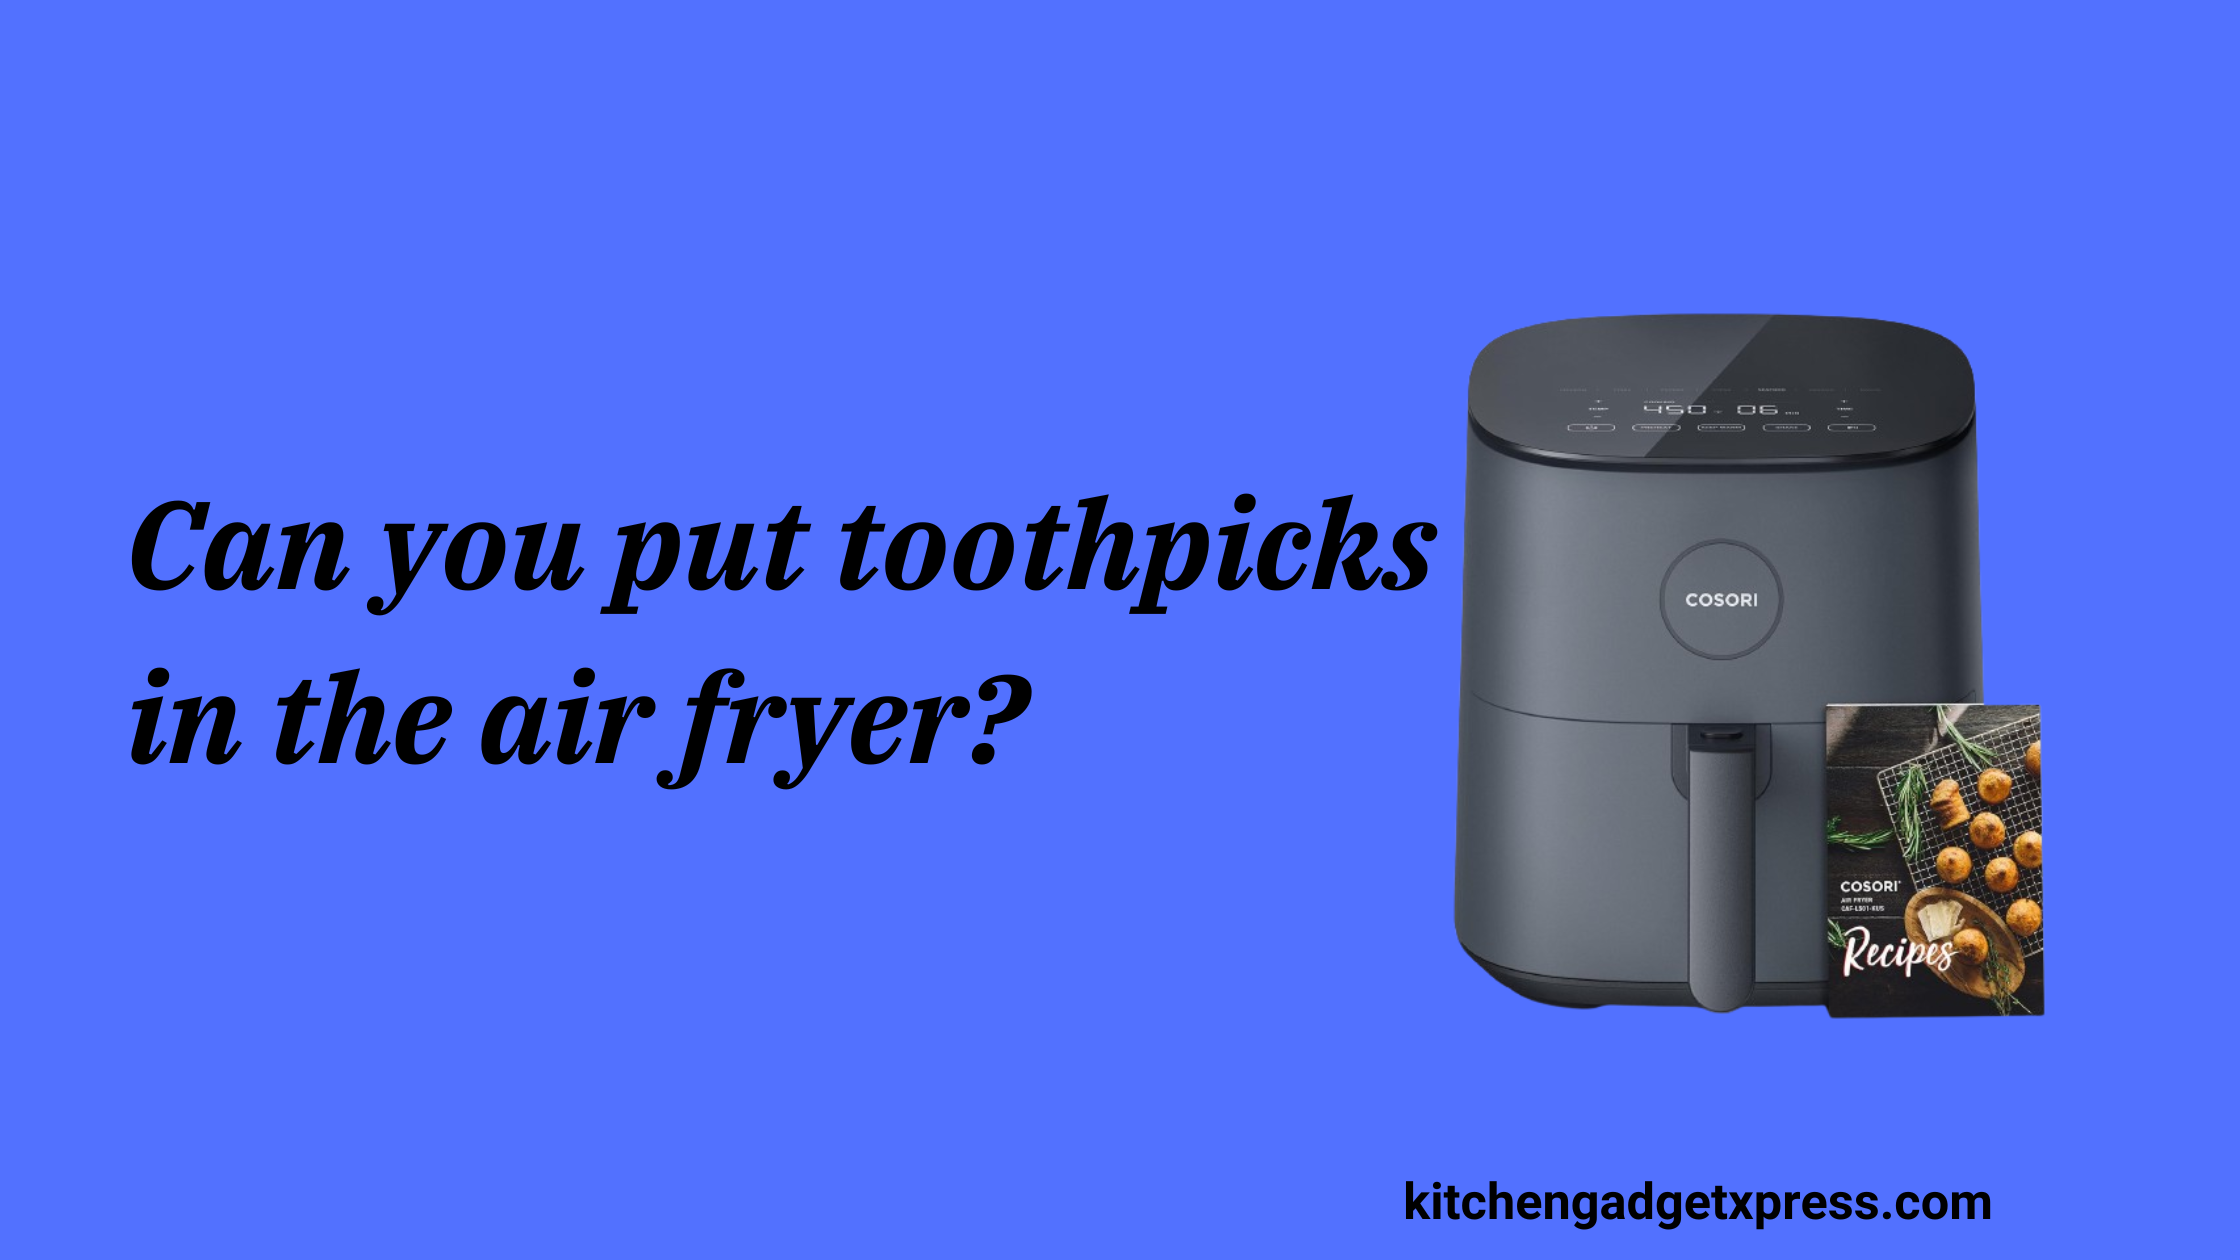 Can you put toothpicks in the air fryer?